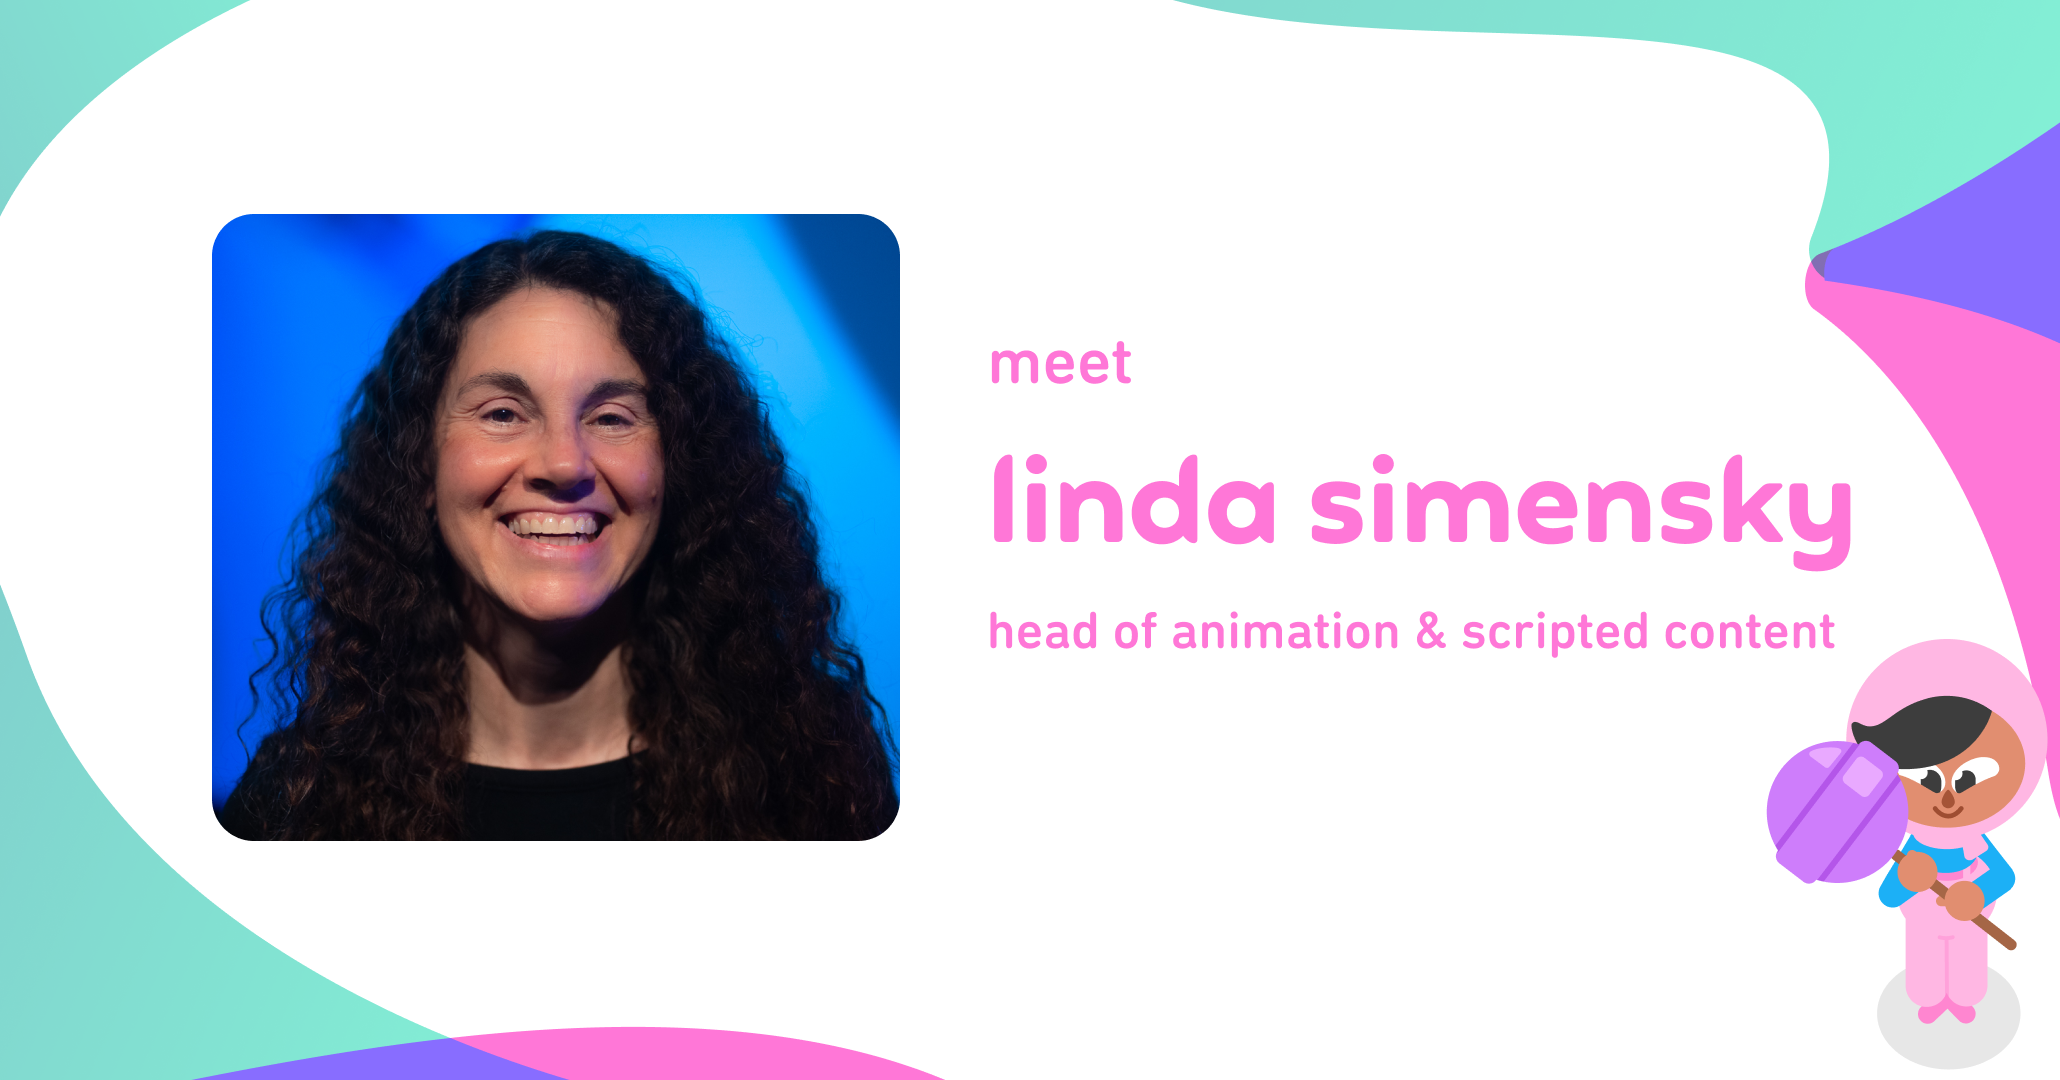 A headshot of Linda Simensky surrounded by colorful shapes. Text reads Meet Linda Simensky, head of animation and scripted content